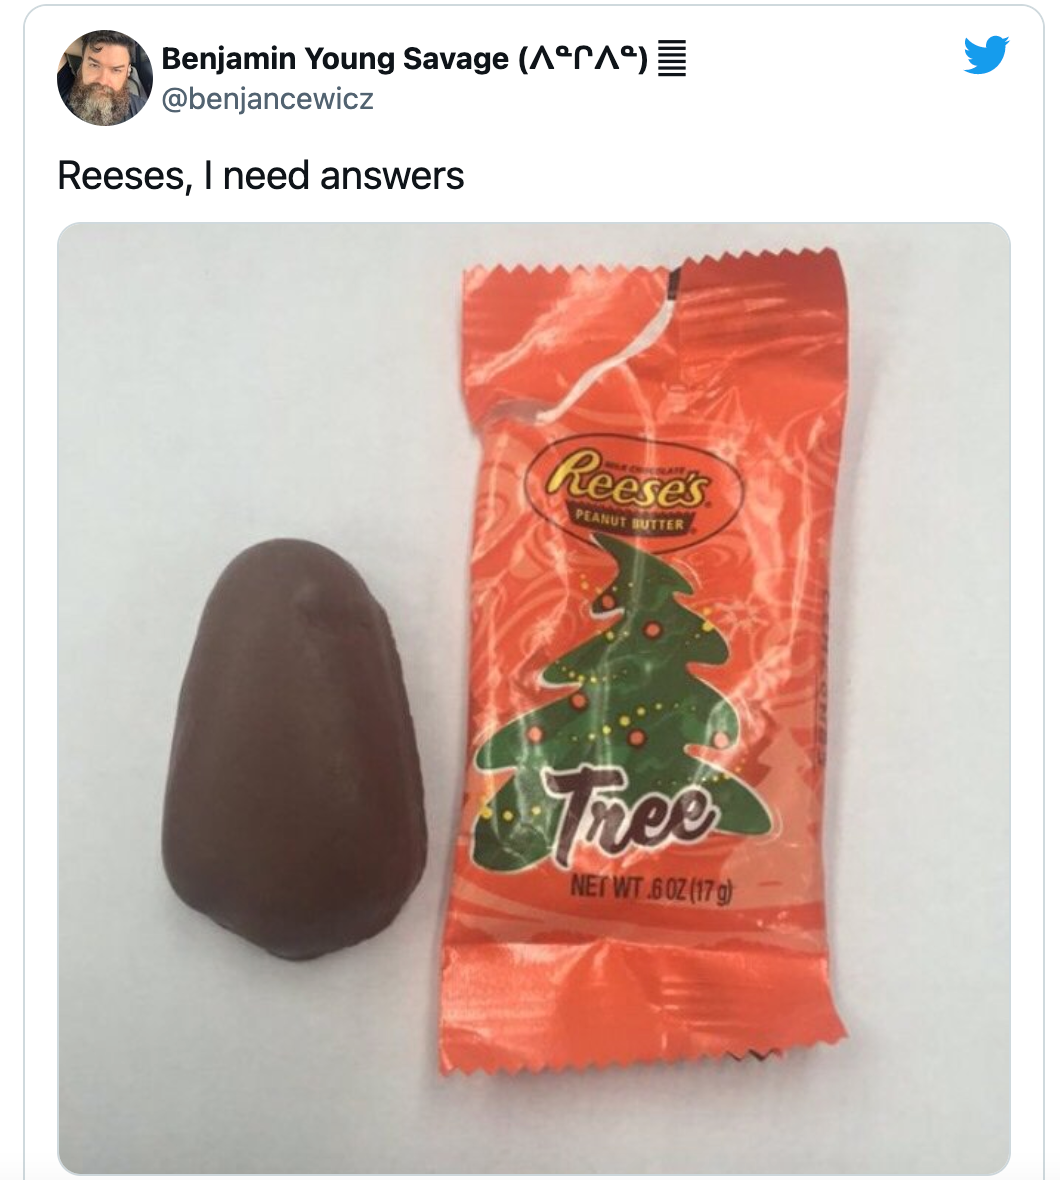 Tweet about Reese’s Christmas tree treat